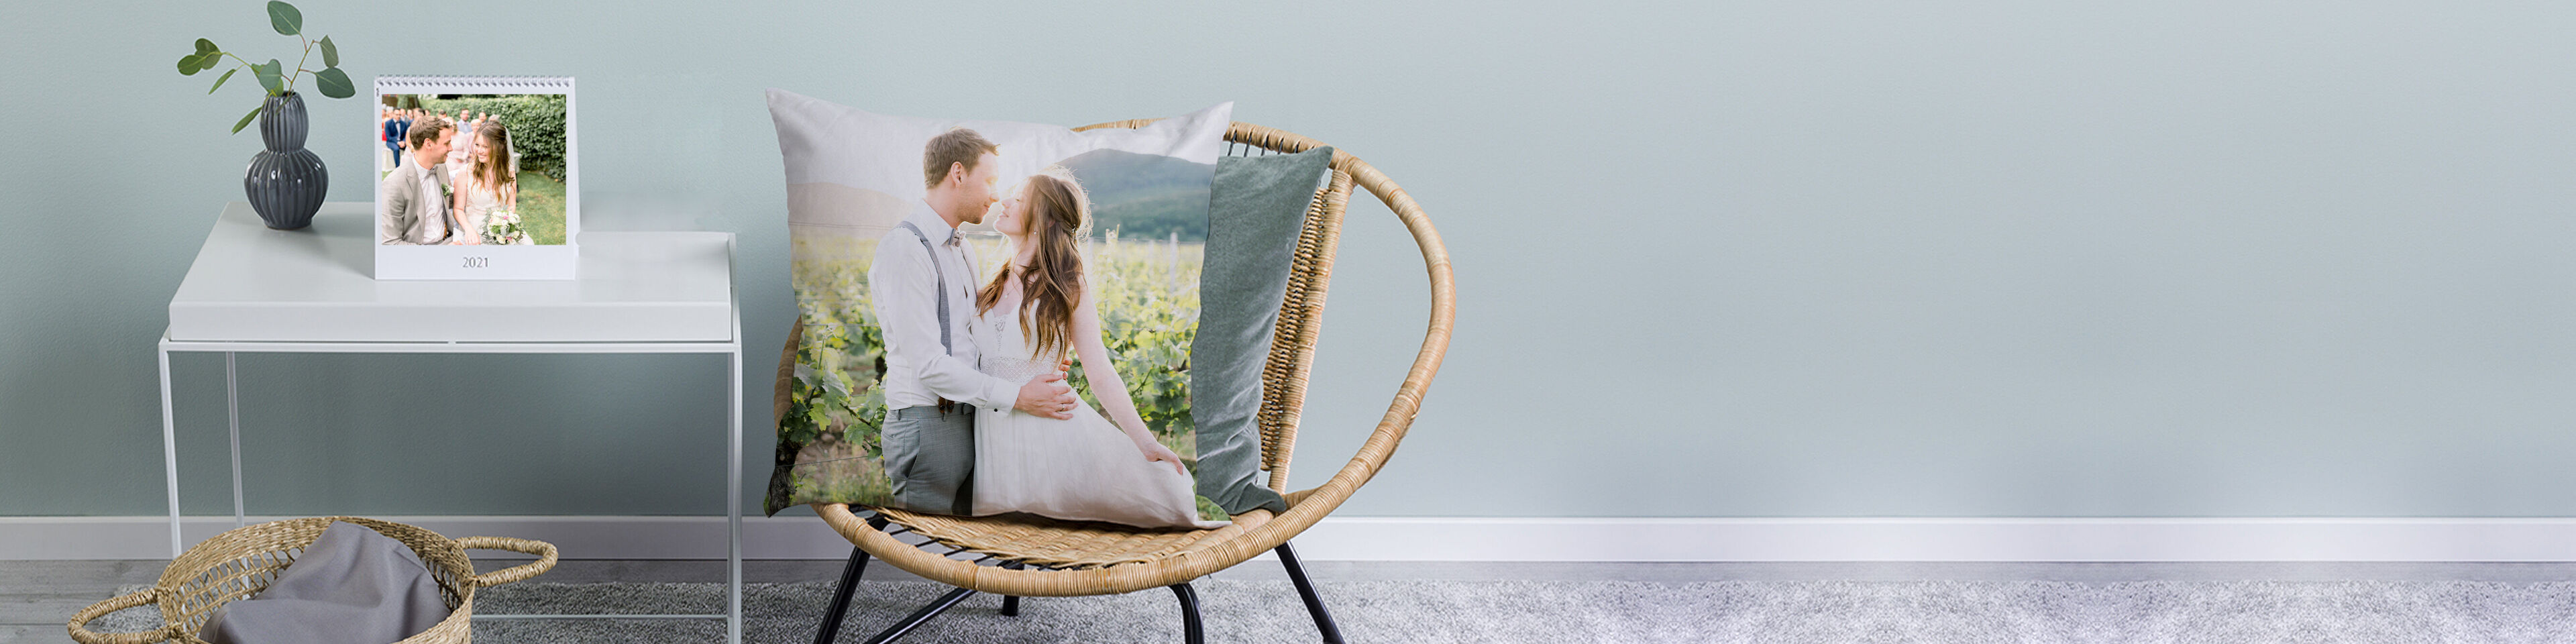 Cushion personalised with wedding photo of bride and groom